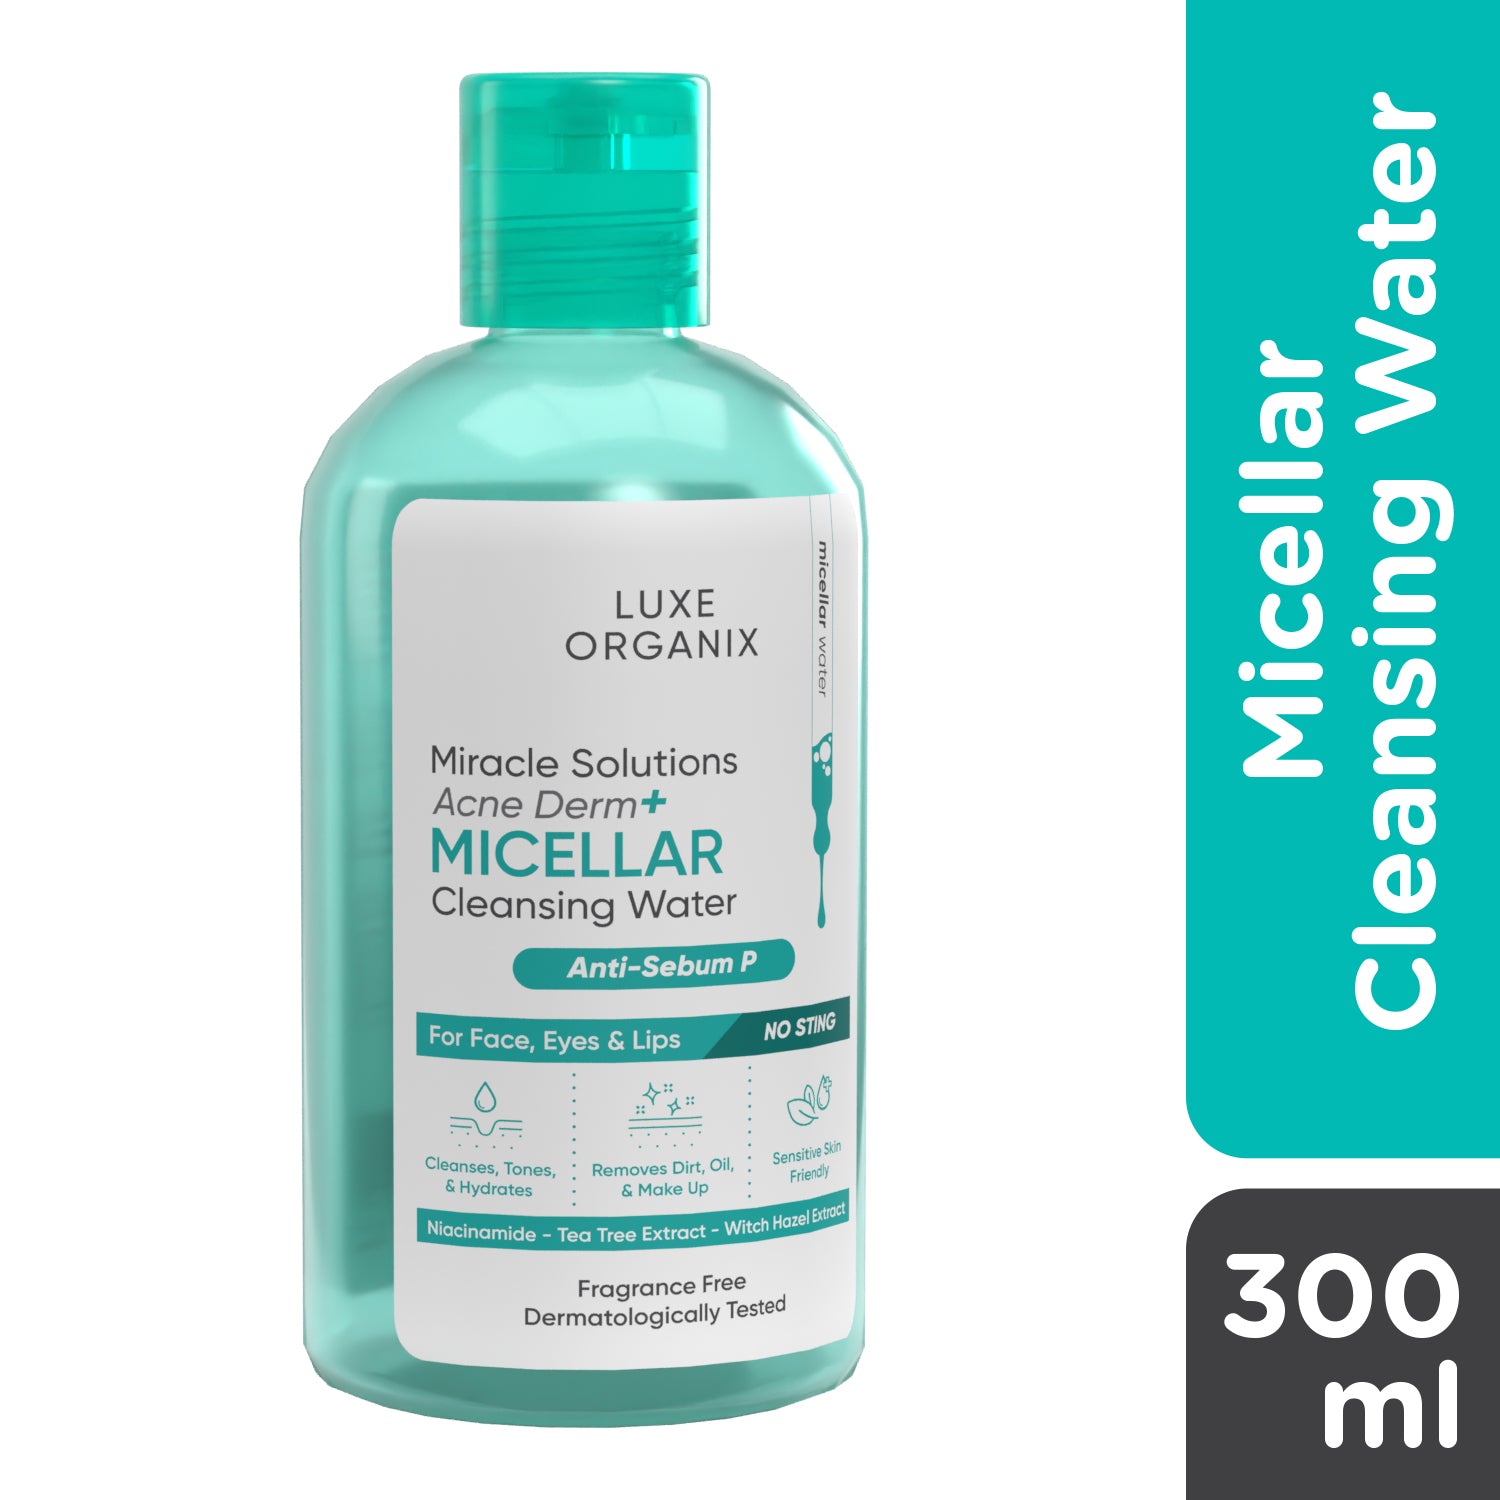 Miracle Solutions Acne Derm+ Micellar Cleansing Beauty Water 300mL